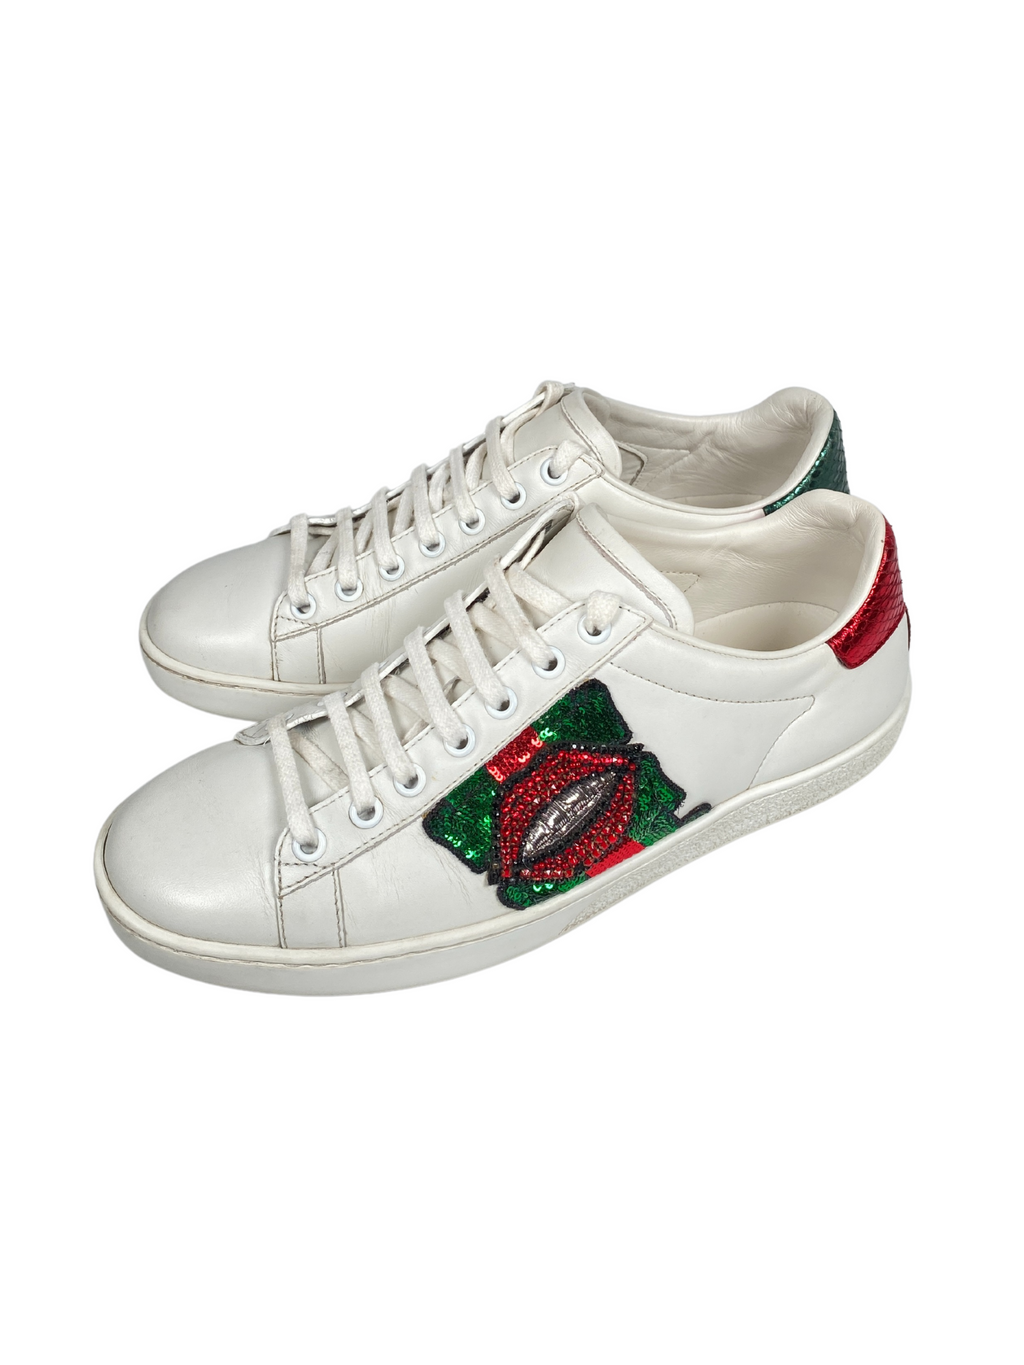 GUCCI - WEB CRYSTAL MOUTH ACE SNEAKERS - SIZE 38